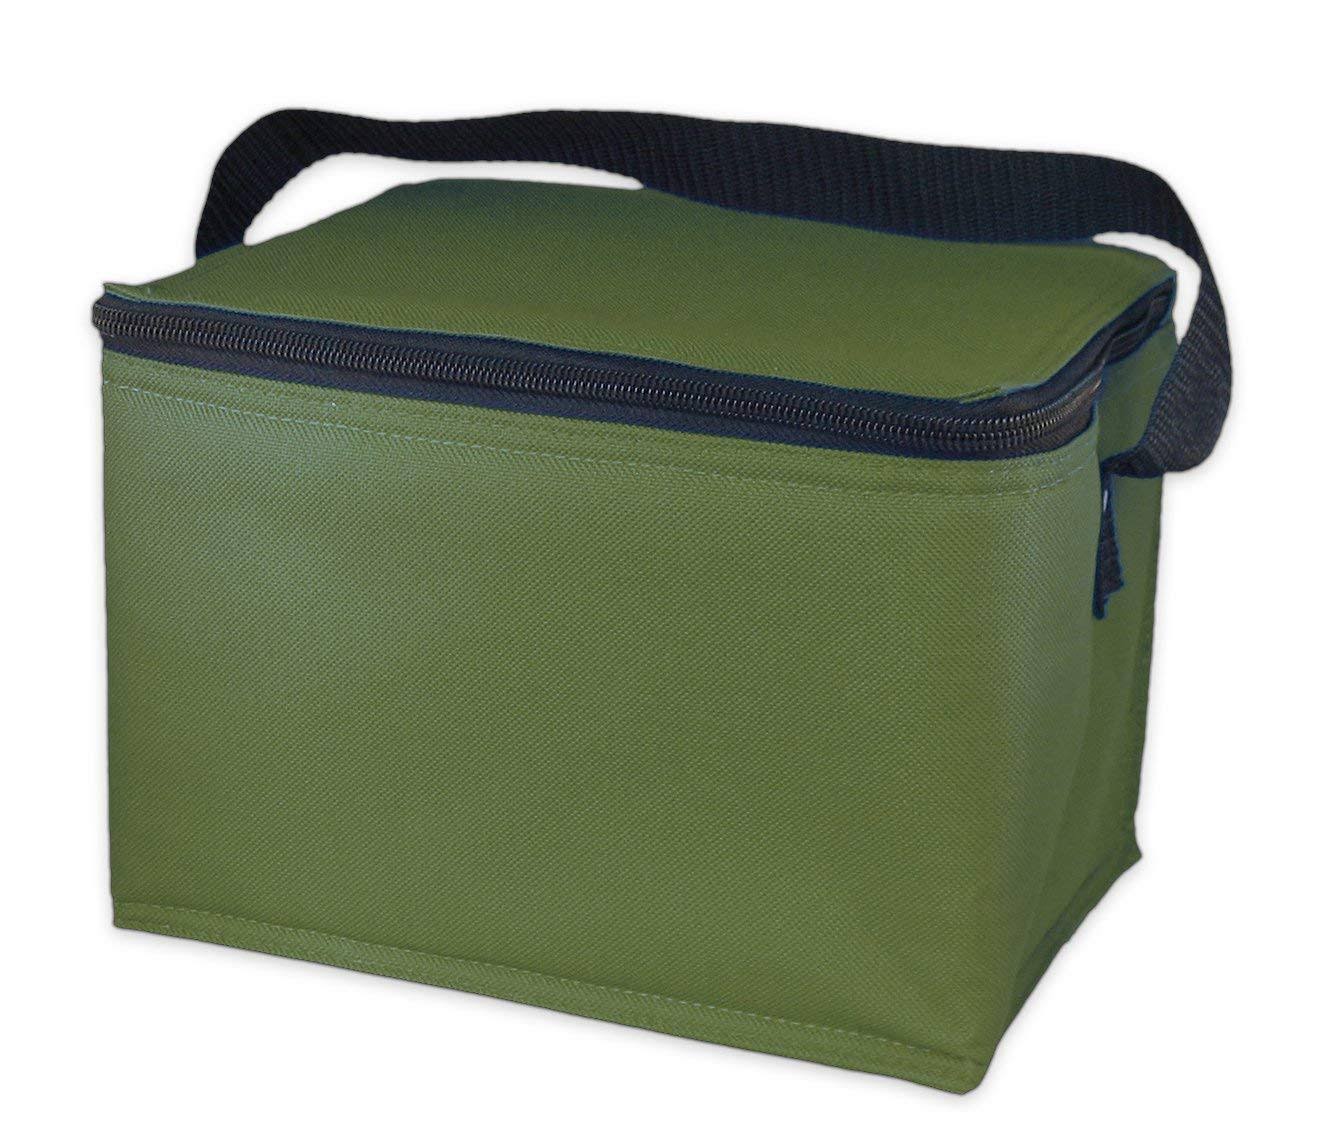 Easylunchboxes Insulated Lunch Box Cooler Bag, Olive